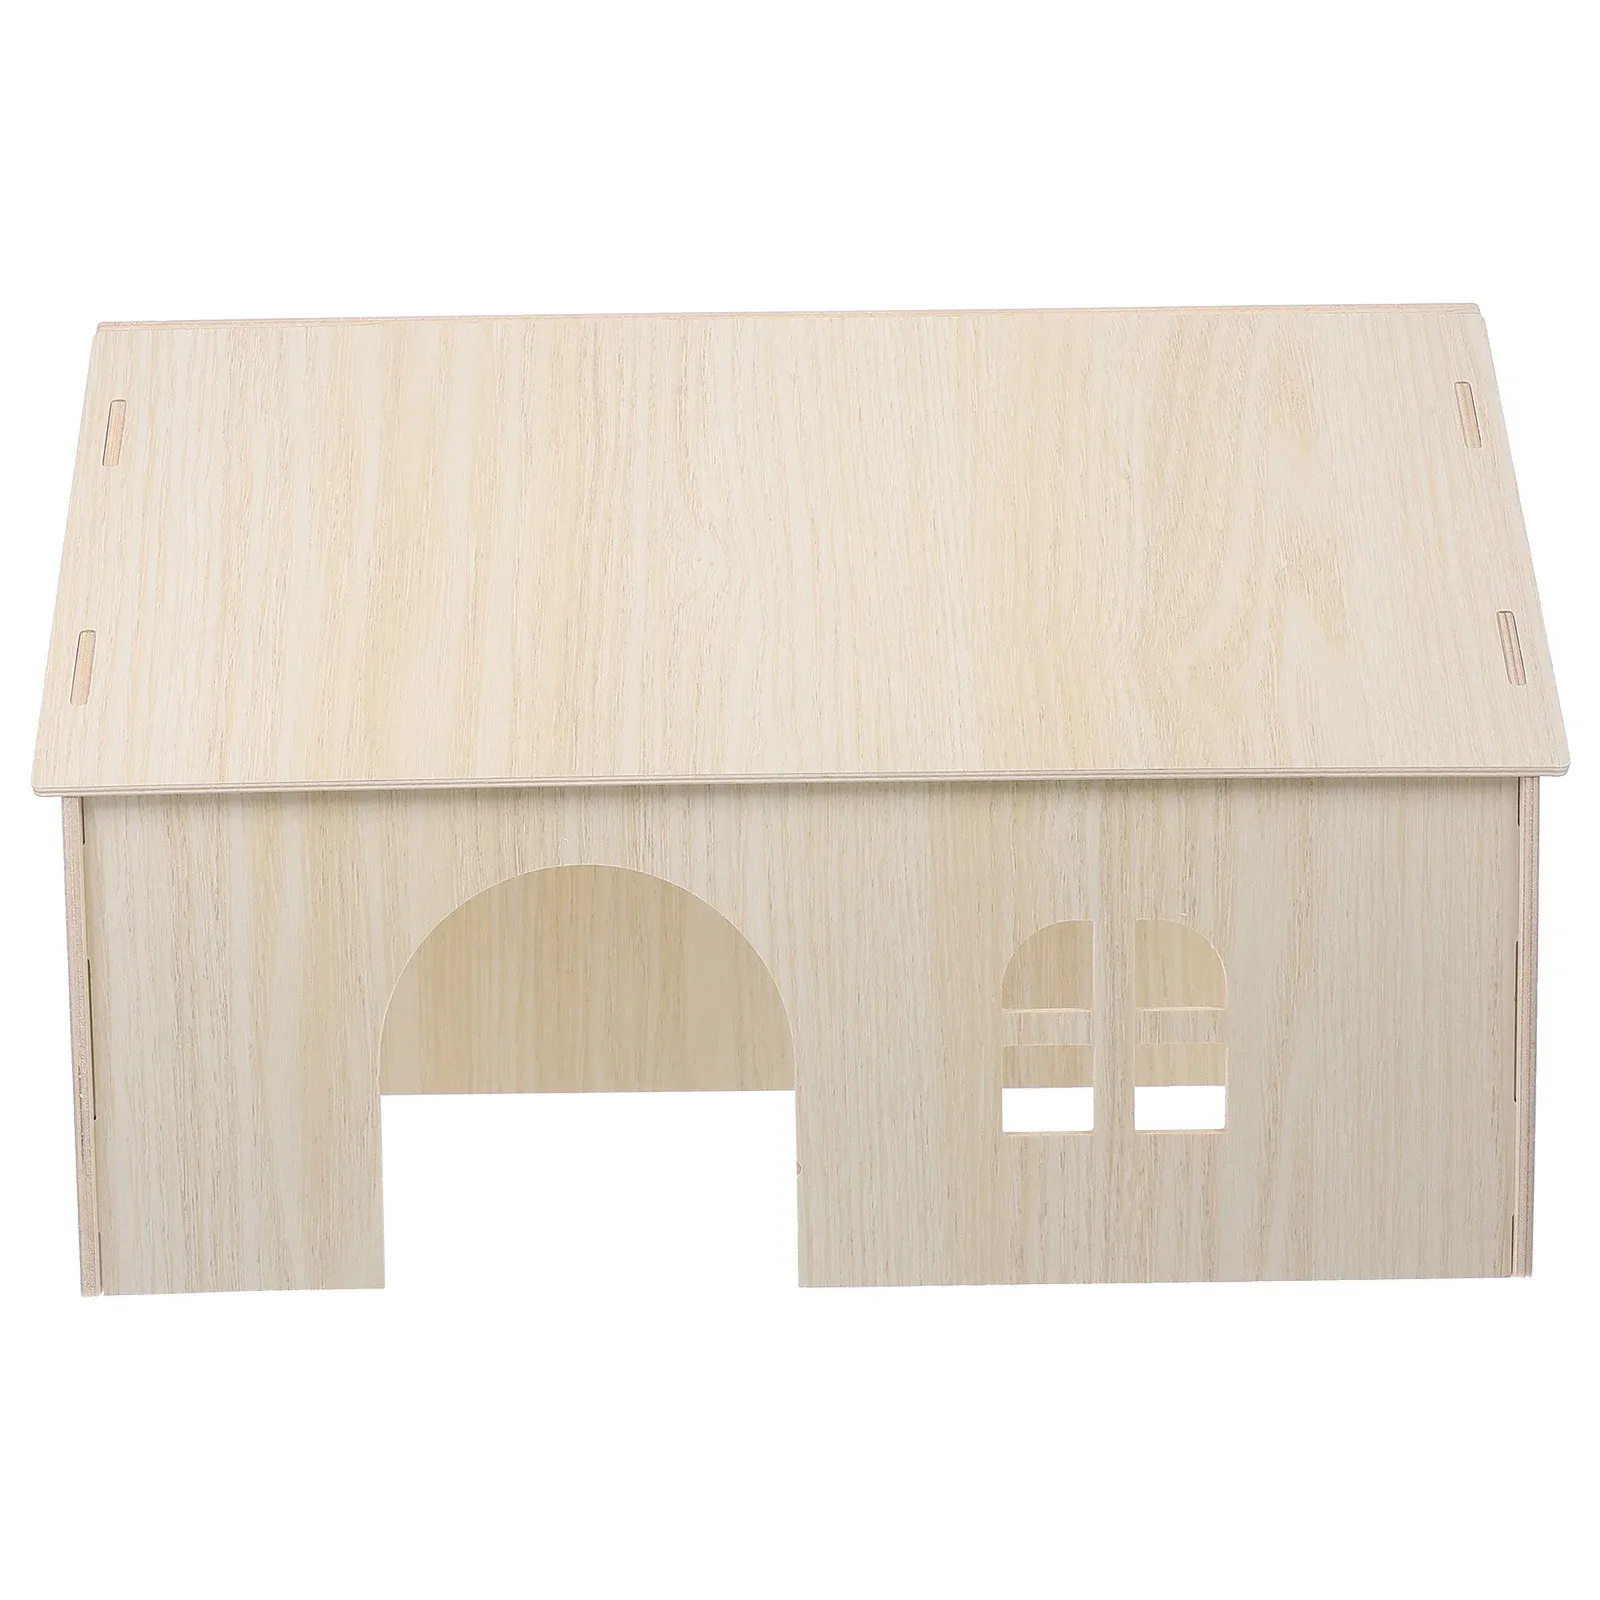 Cages Guinea Pig Maze Rabbit Toys Hamster Hut Hideout Accessories Squirrel House Nest Wood Wooden Chinchilla Playground